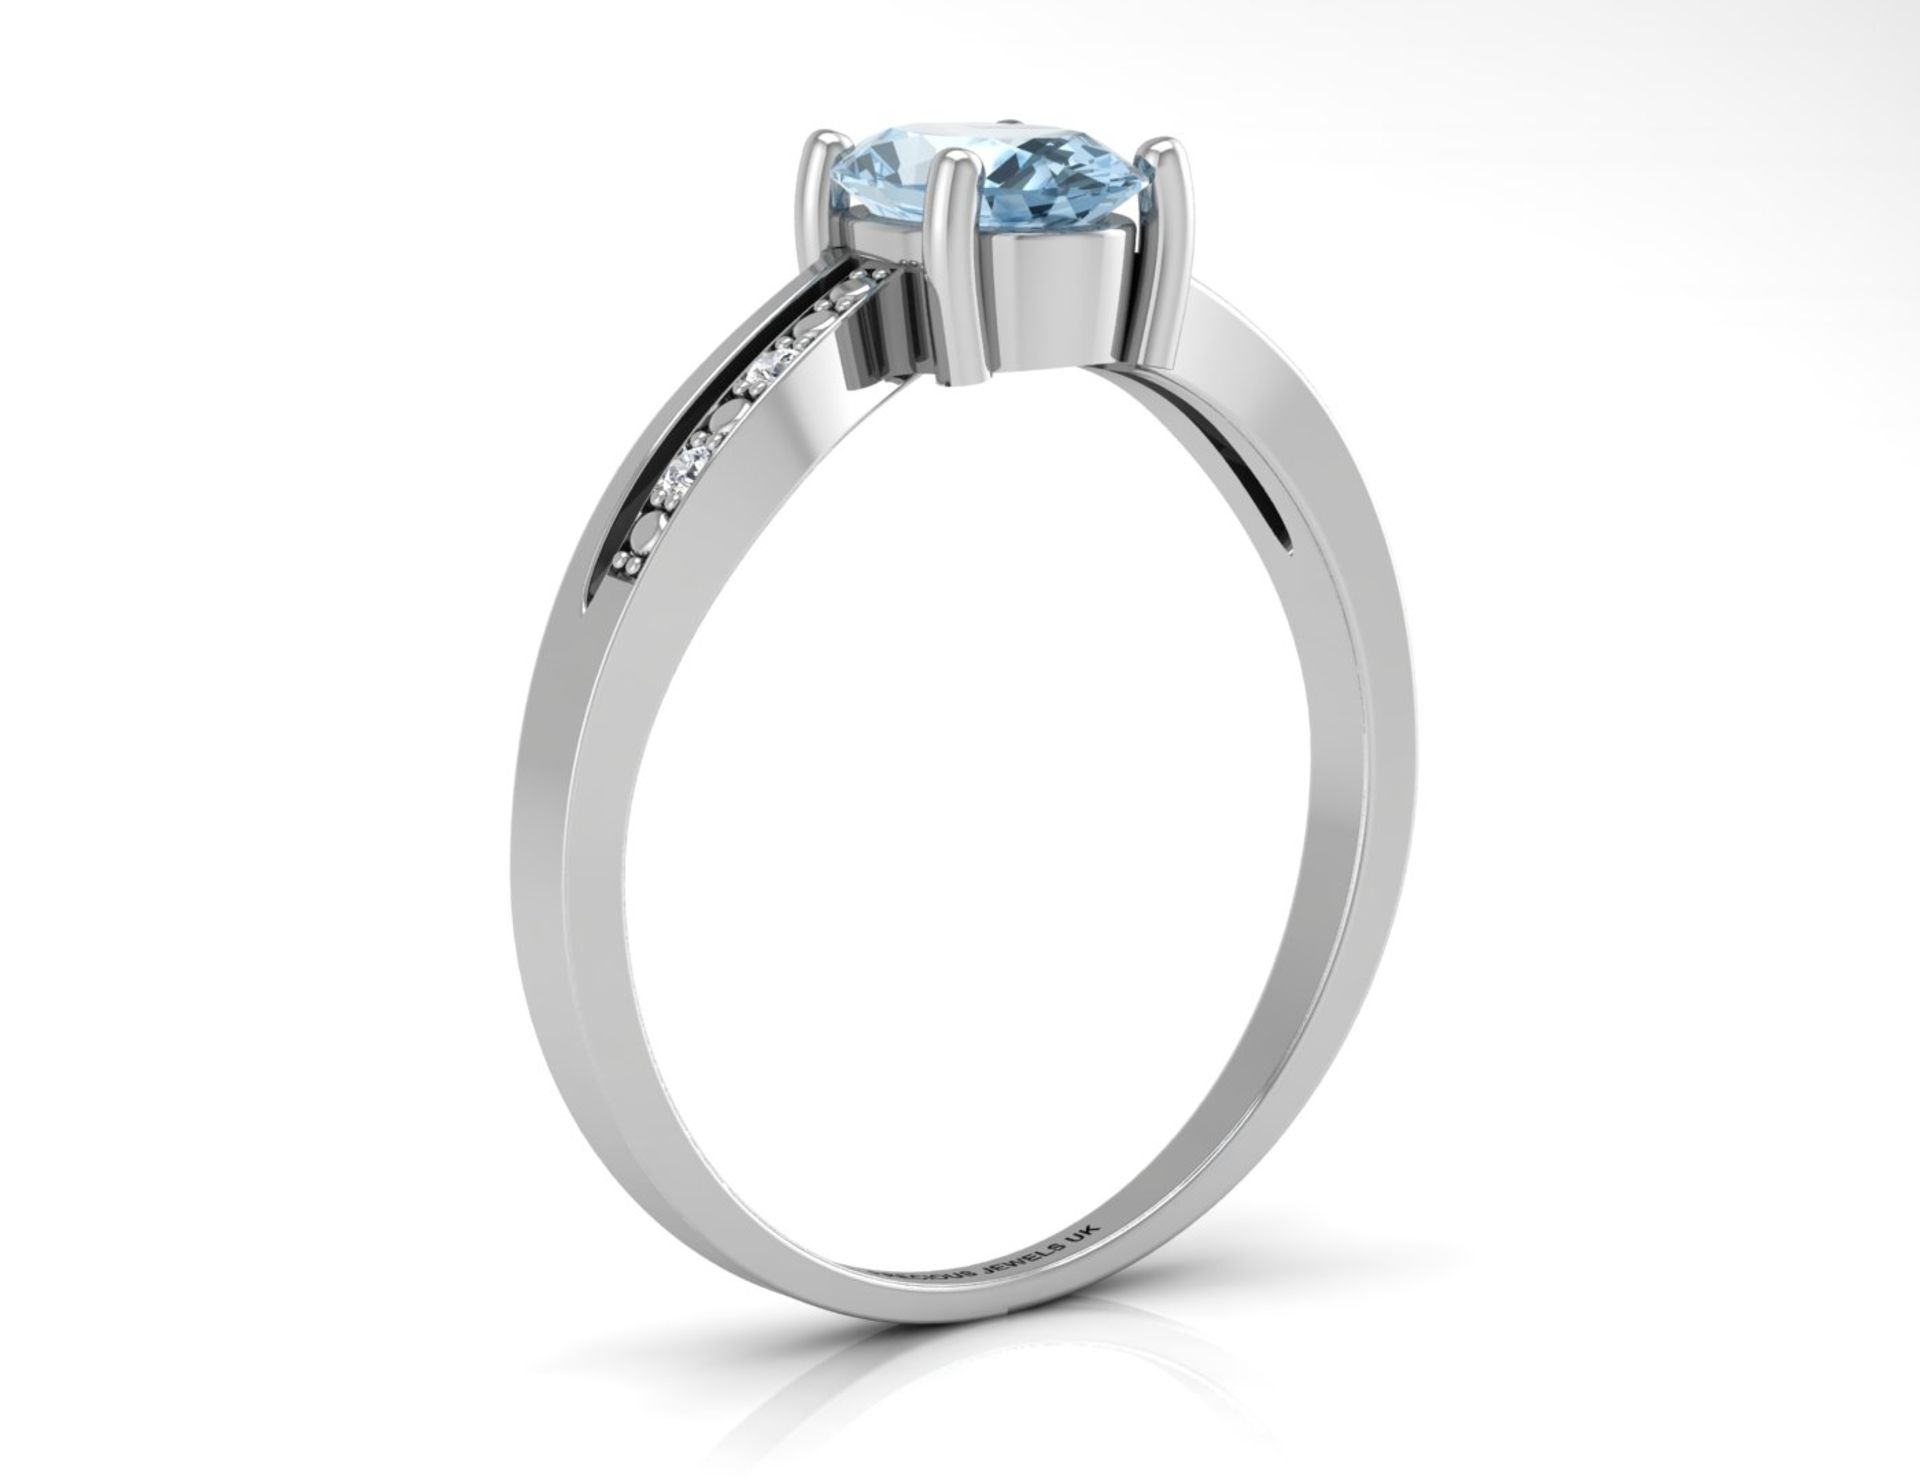 9ct White Gold Diamond and Blue Topaz Ring (BT1.00) 0.02 Carats - Image 2 of 5